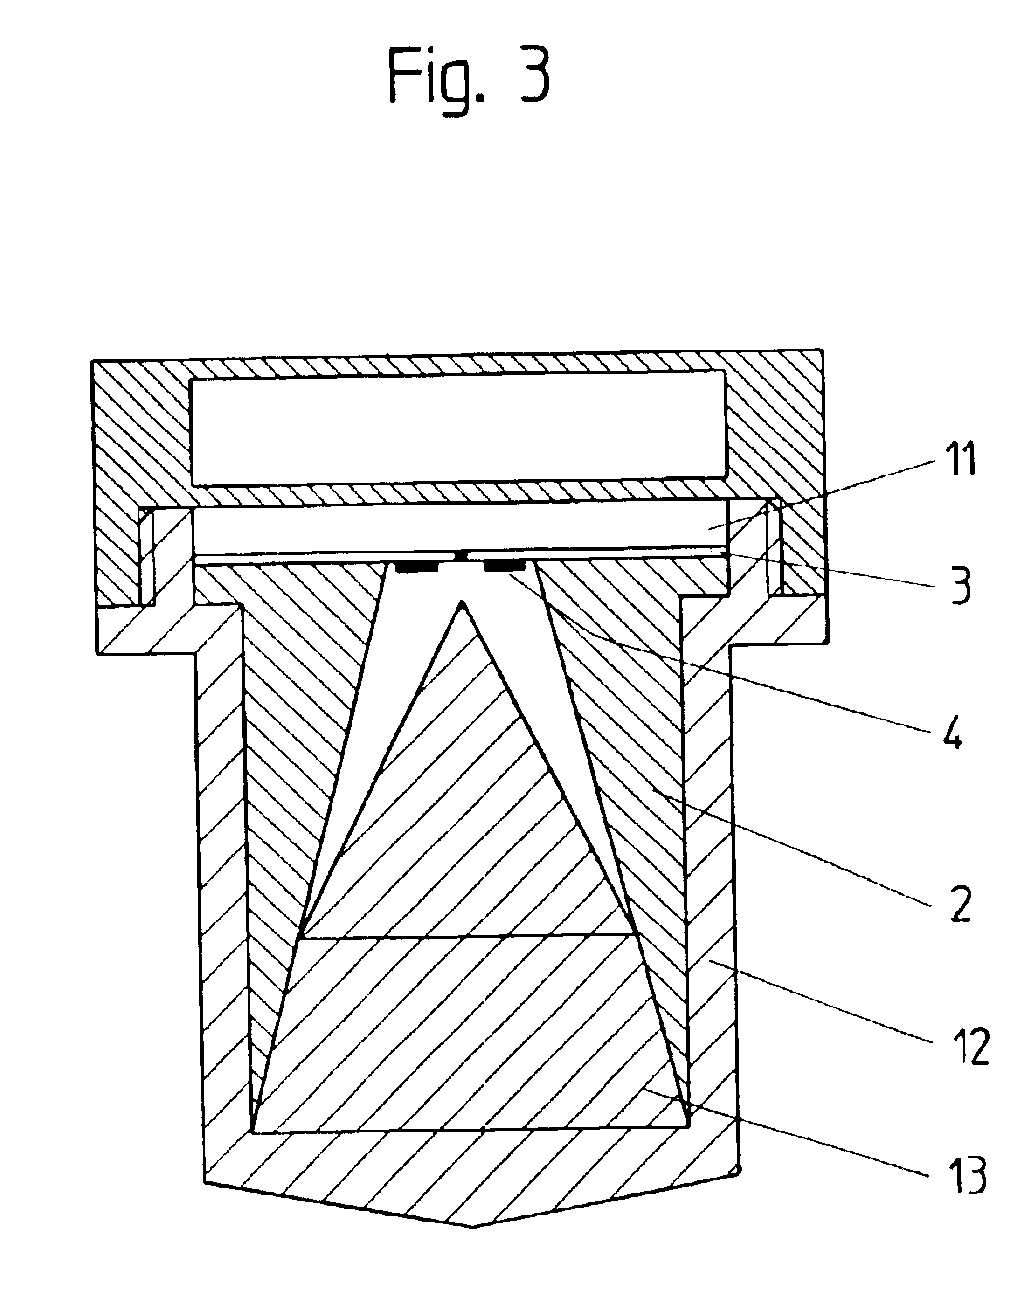 Antenna system for a level measurement apparatus